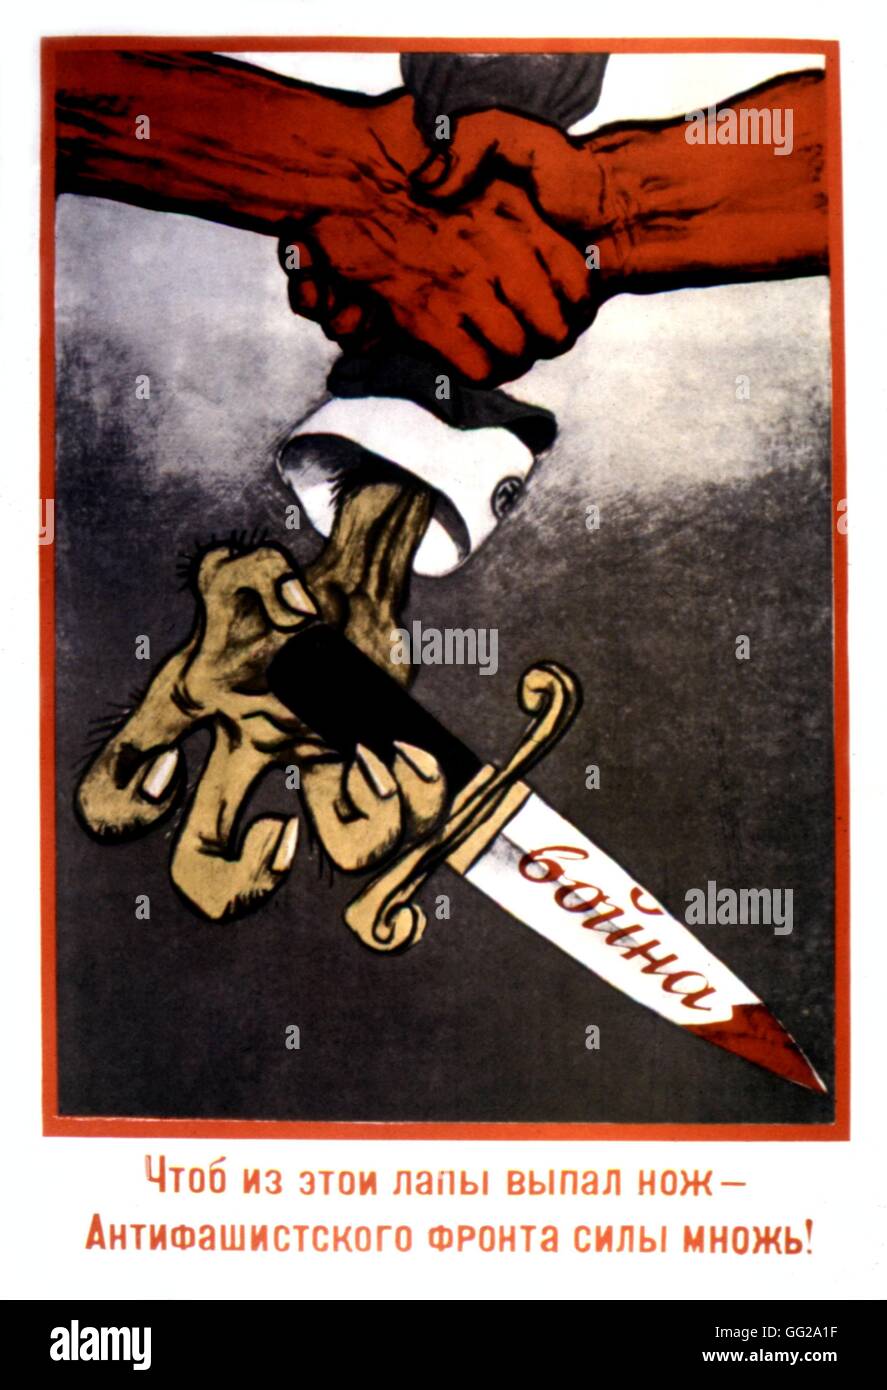 Propaganda poster by M. Tcheremnykh. 'Increase the forces of the antifascist front, so that this hand lets go of the knife!' 1938 U.S.S.R. Stock Photo